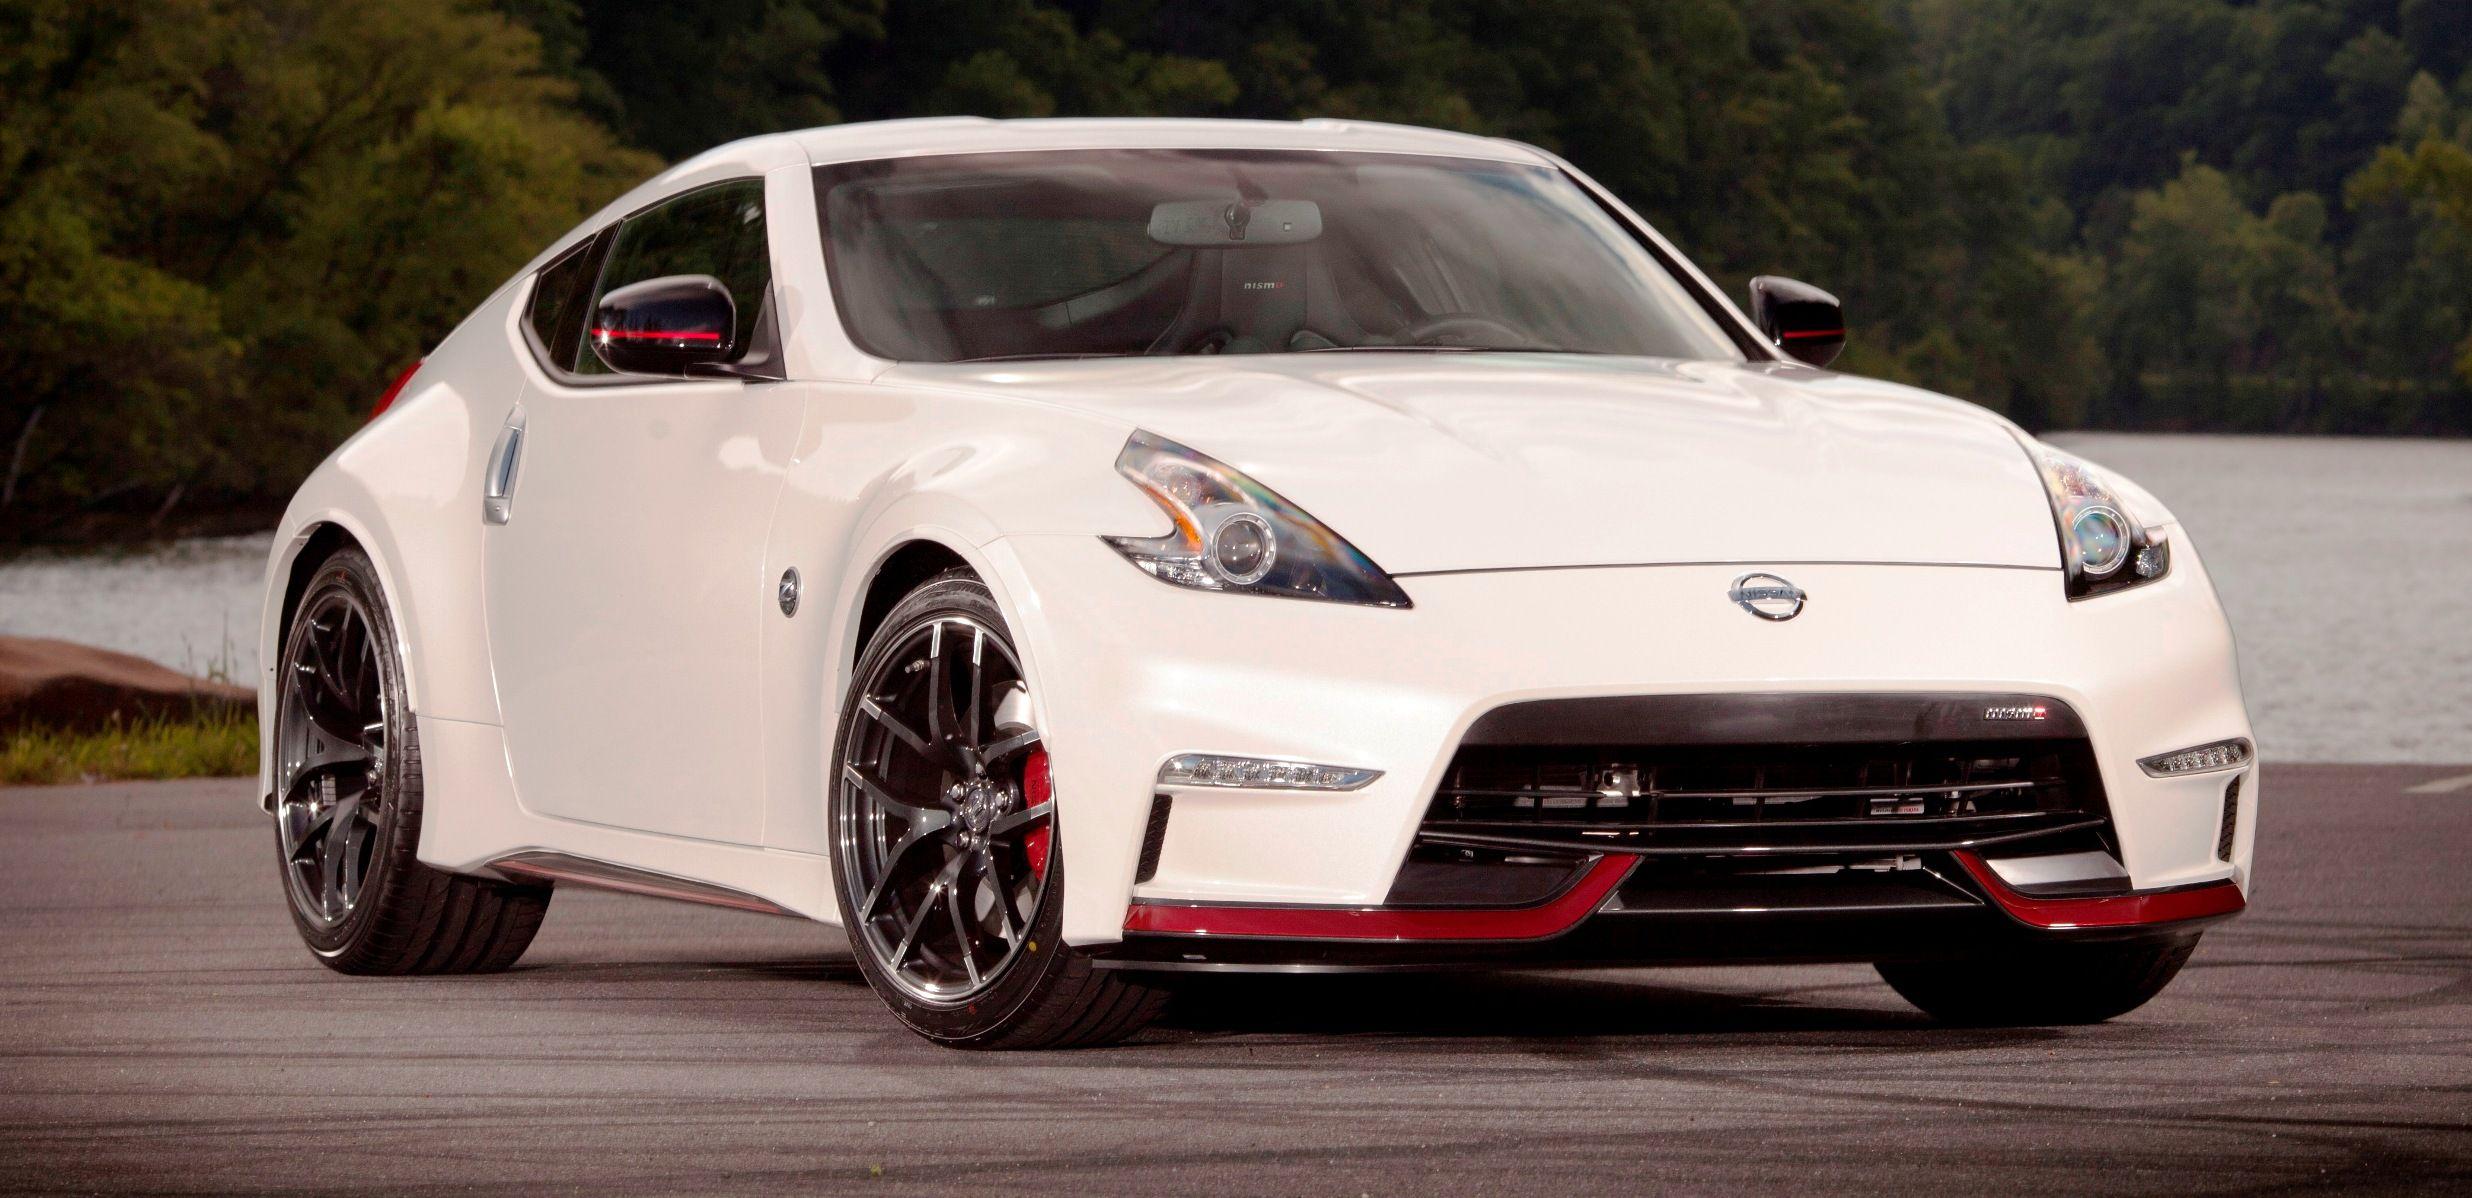 Nissan 370Z Nismo High Quality Image Wallpaper 5546